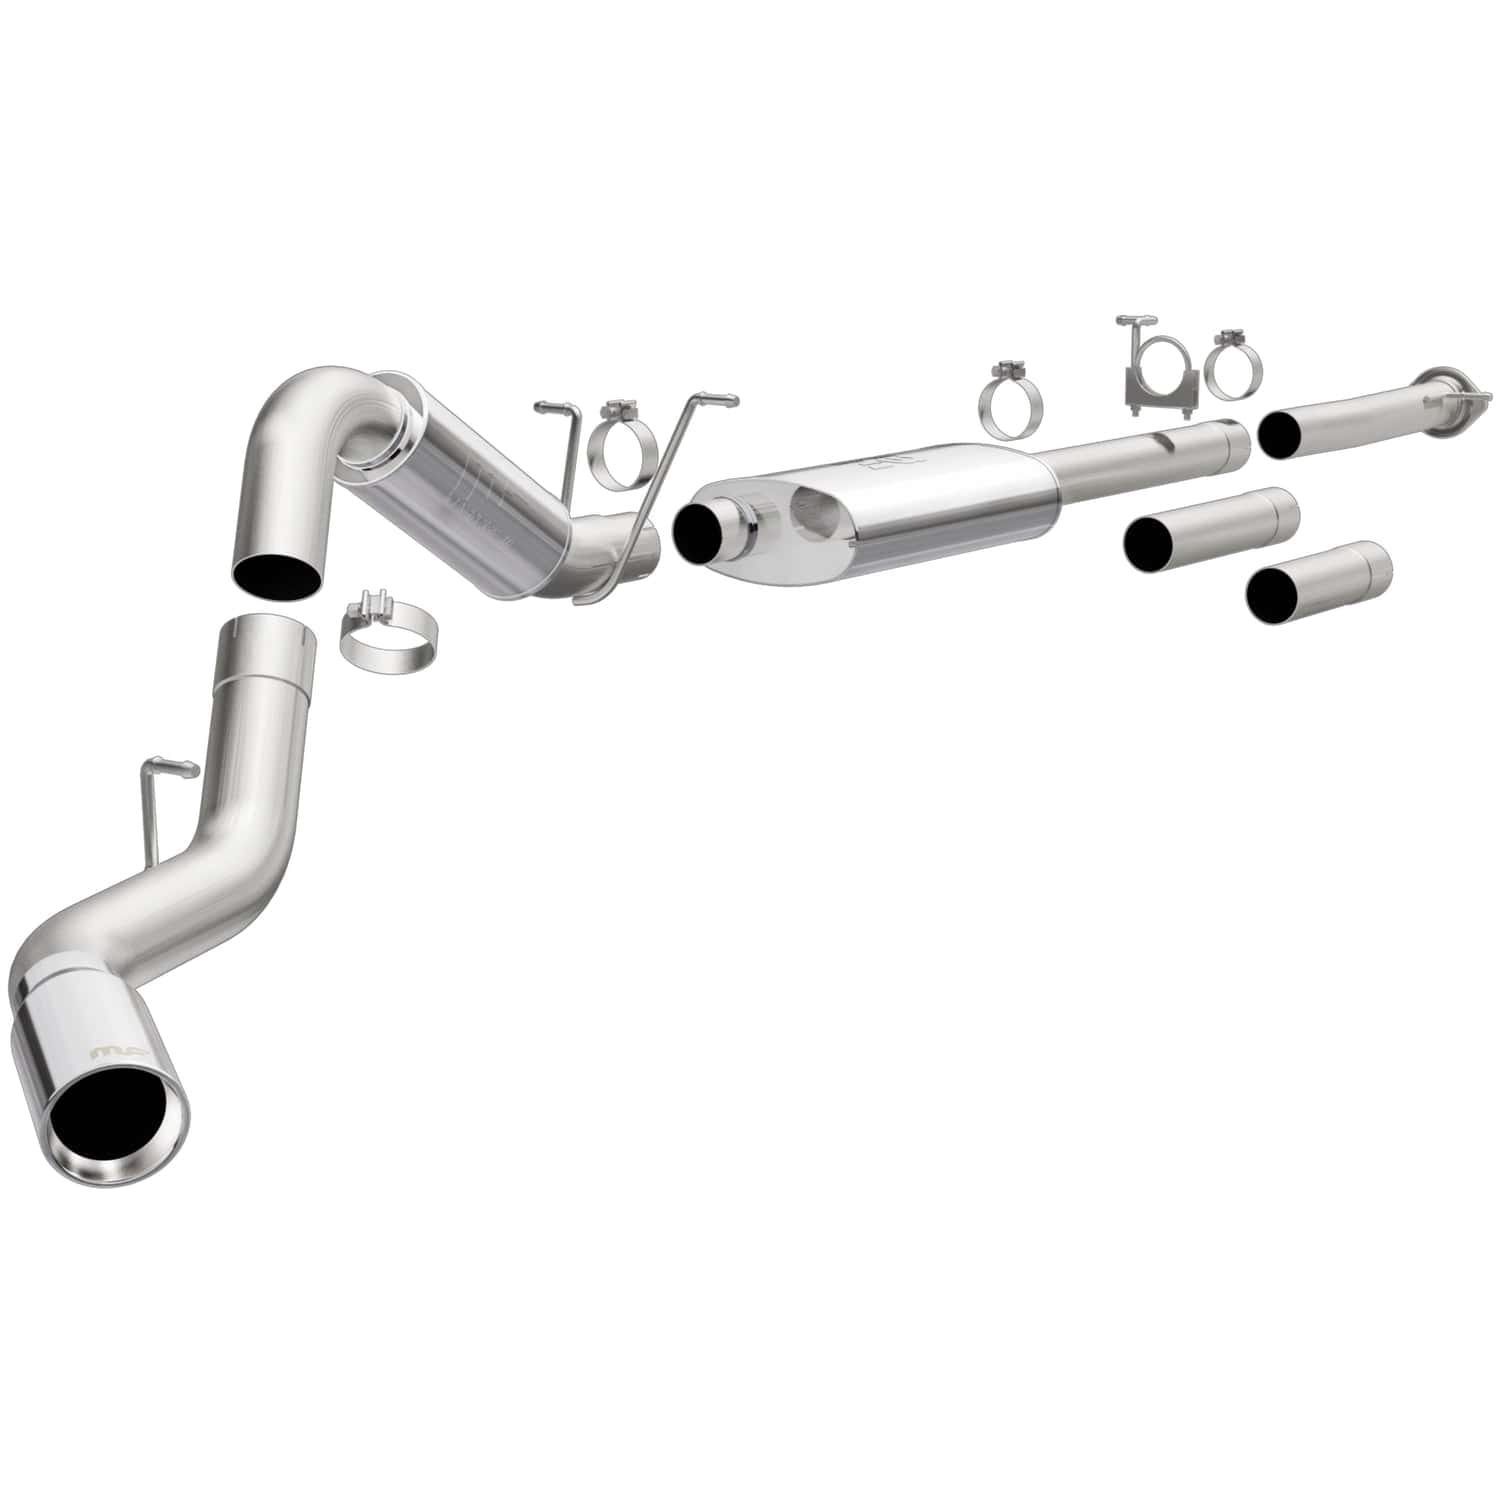 MagnaFlow Street Series Cat-Back Performance Exhaust System 19026